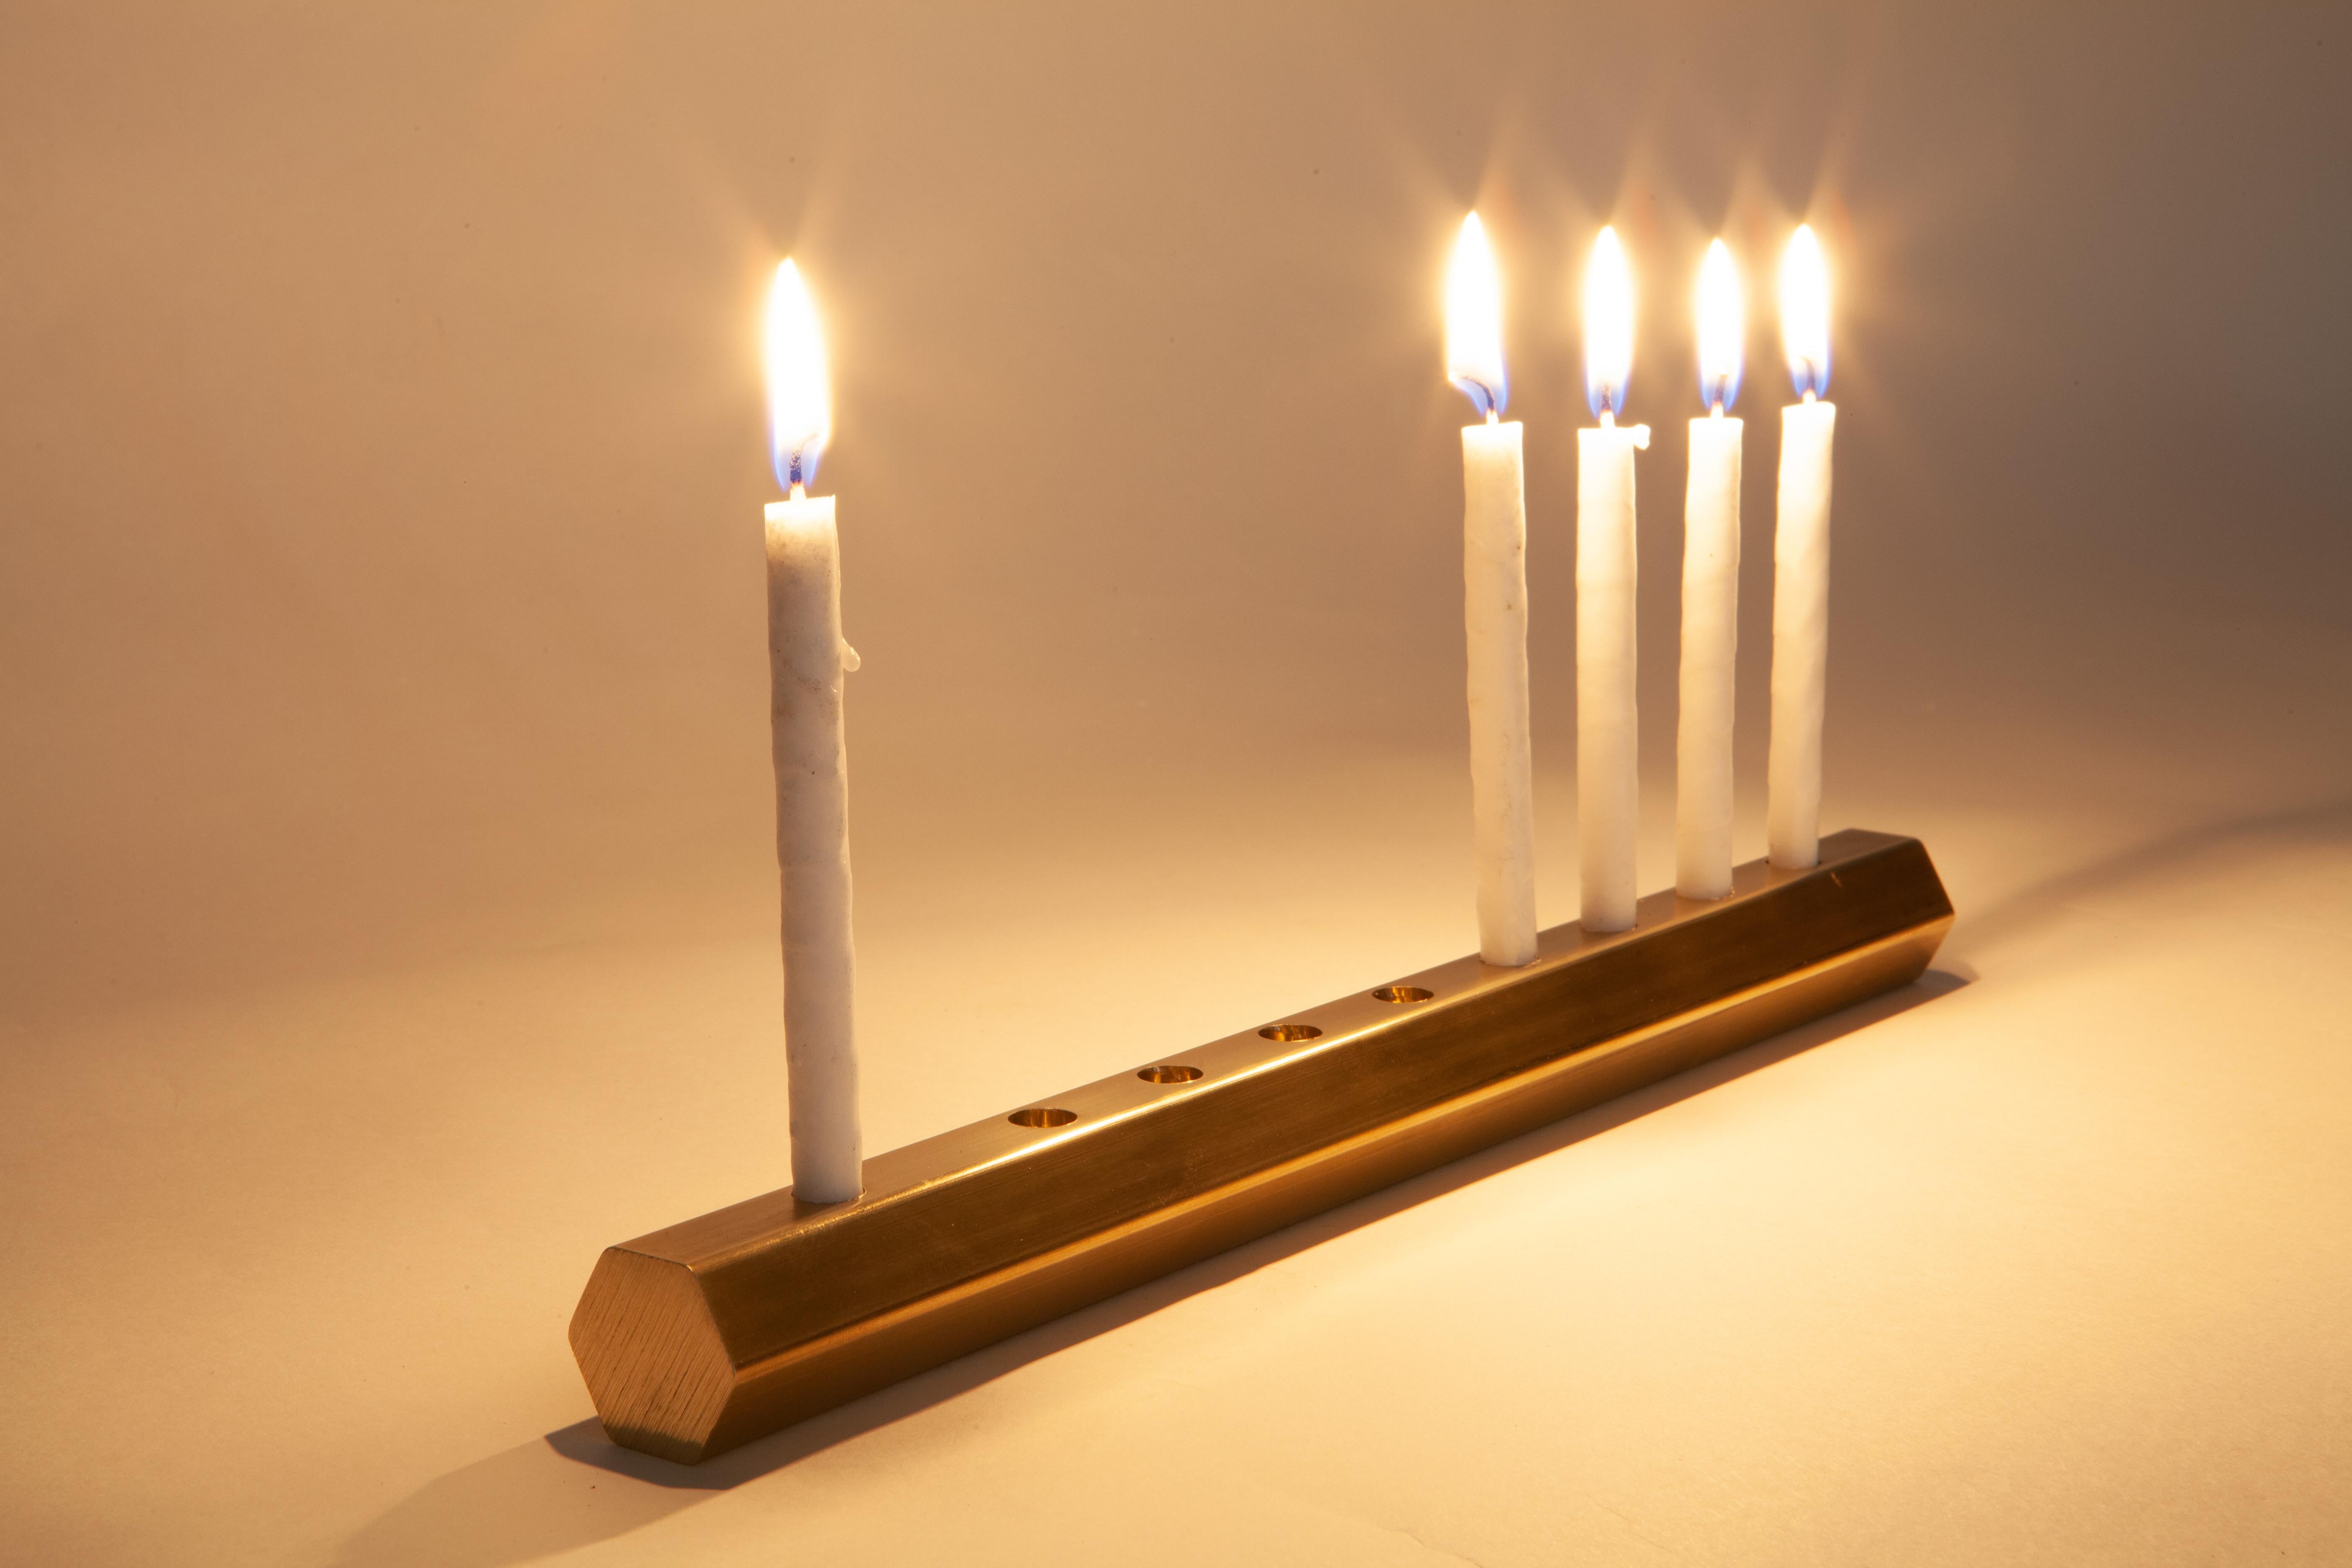 This New Menorah is made from Lead-Free Brass!* We also make an aluminum one.

It is all about the candles and candle-light.
It's Six-sided like the Star of David.
Zero waste, like all of our furniture.
It's the simplest, most elegant menorah I can